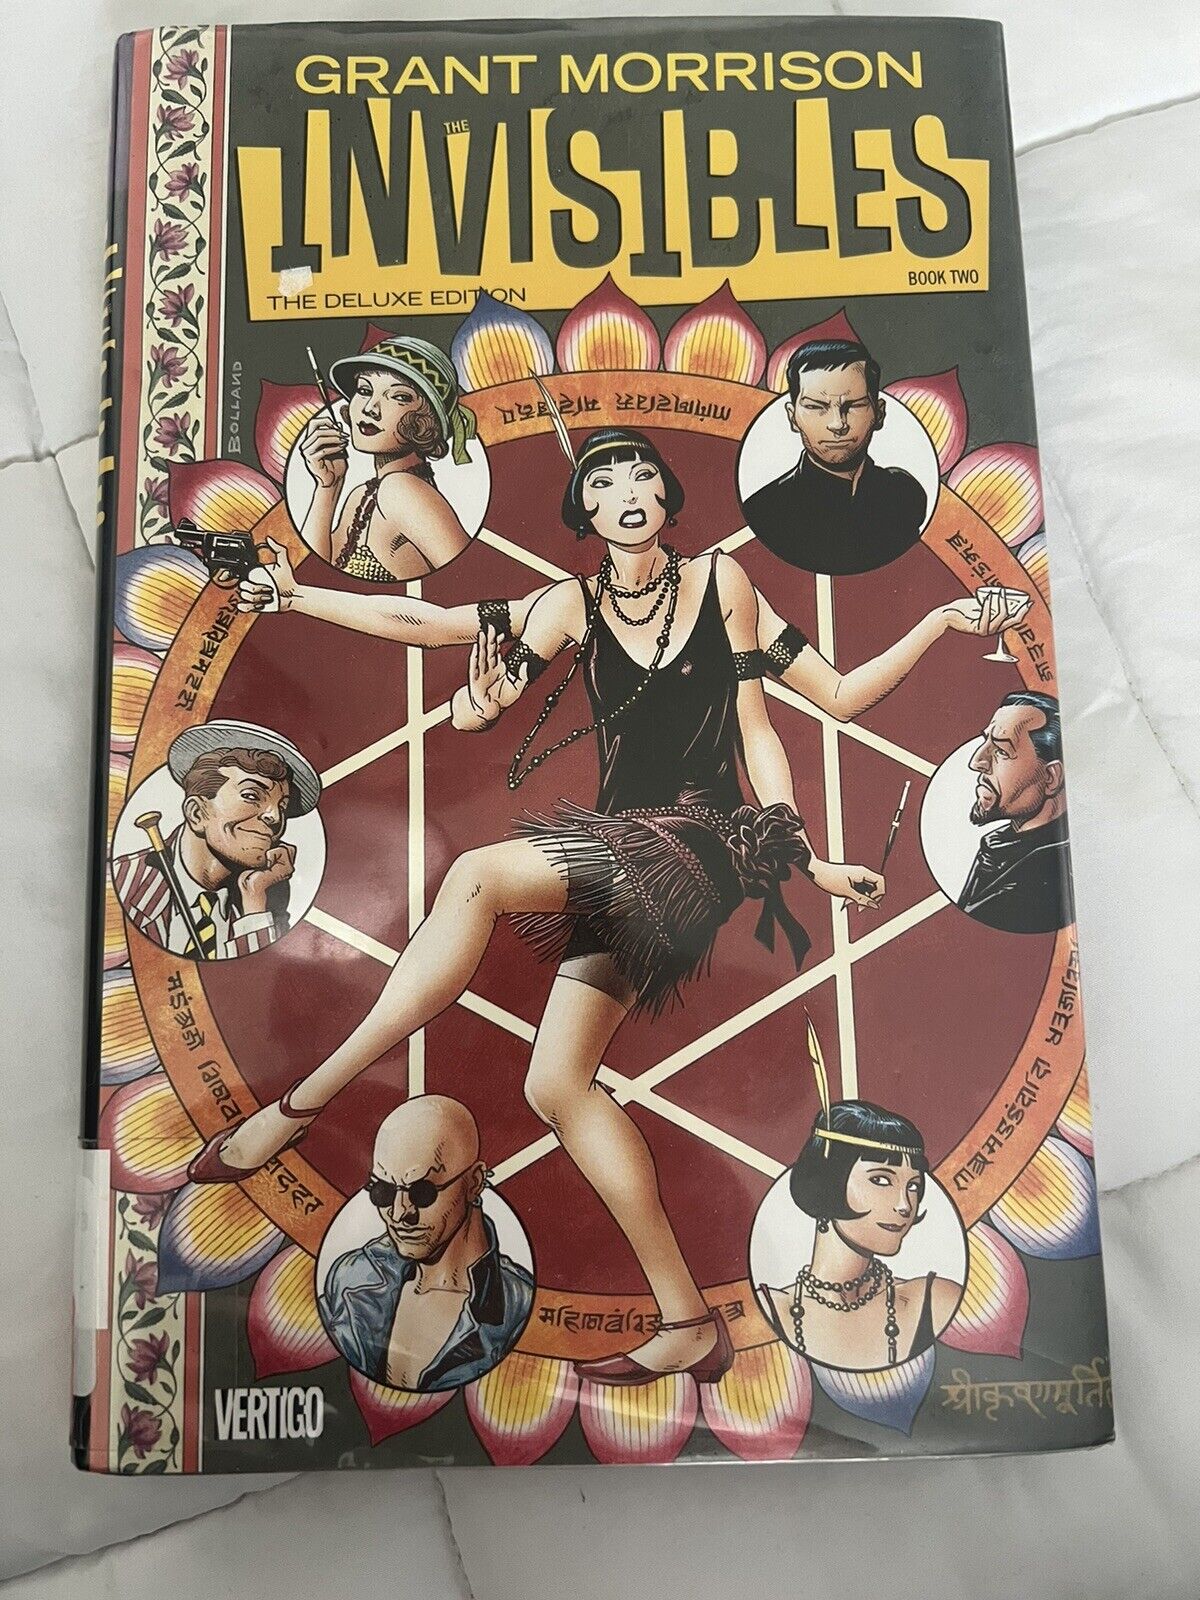 Invisibles Book Two Deluxe Edition Hardcover G. Morrison